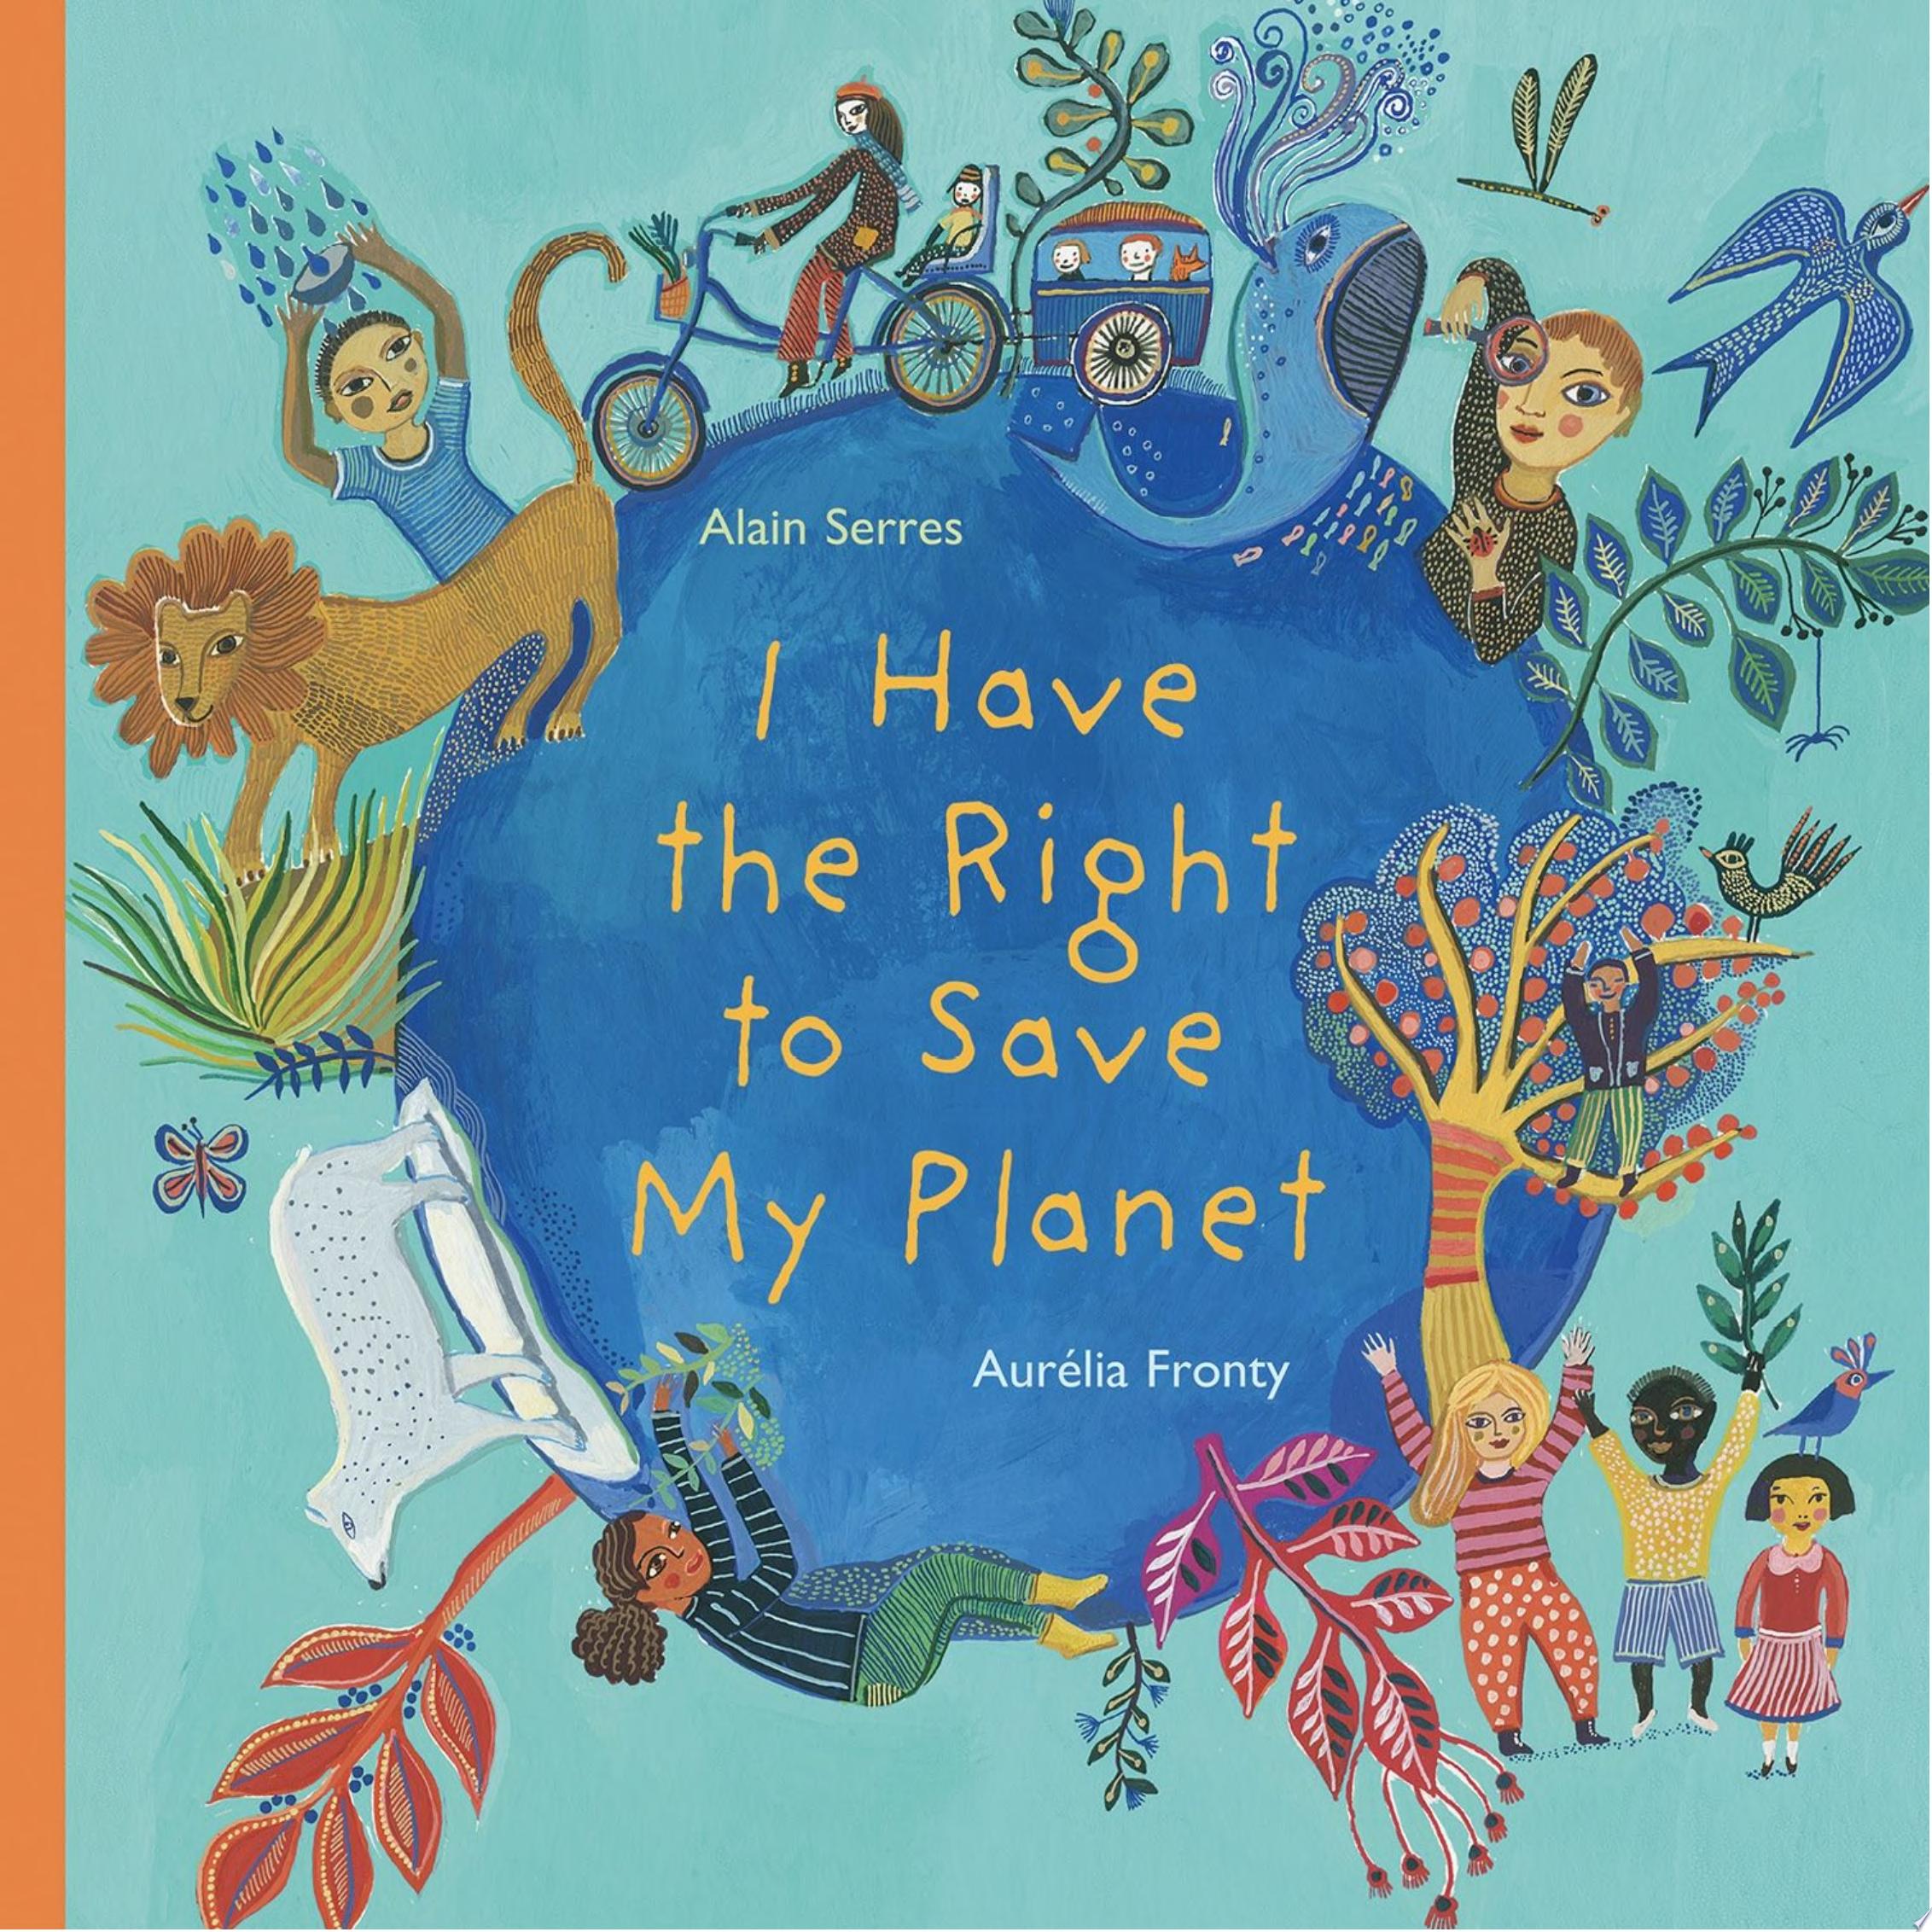 Image for "I Have the Right to Save My Planet"